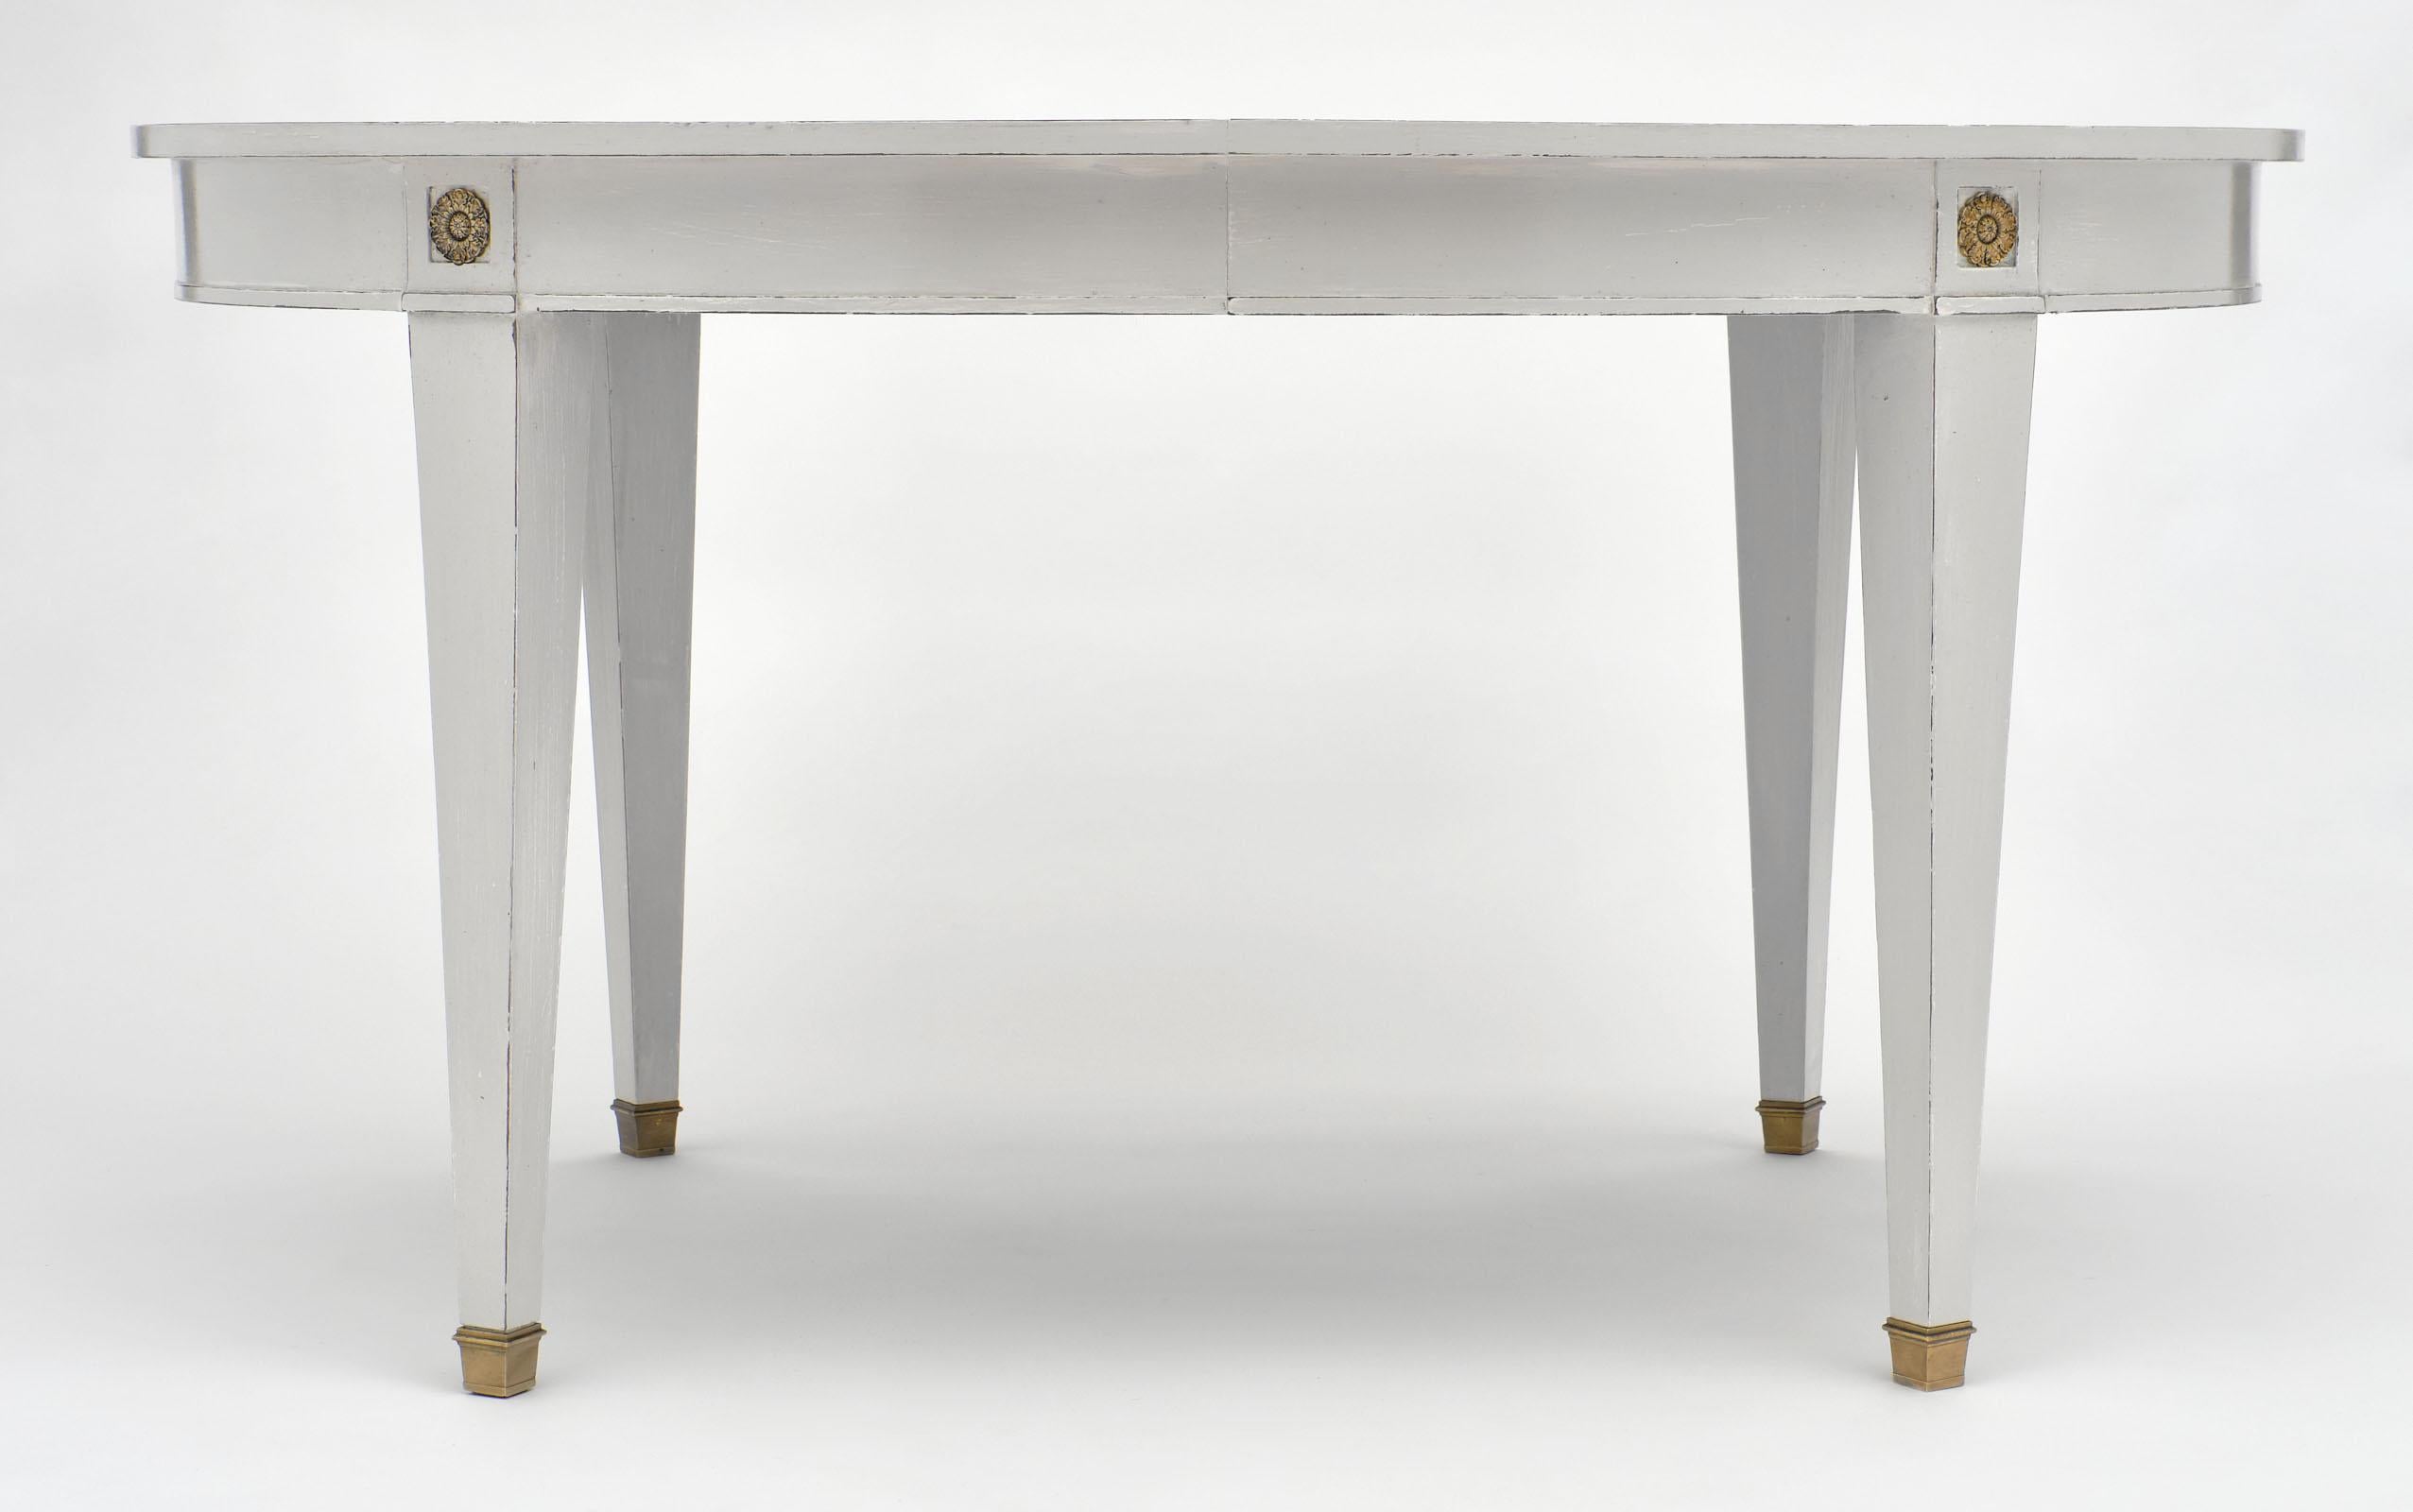 Directoire style painted dining table featuring beautiful brass feet and hardware. We love the classic details and strong lines of this table!